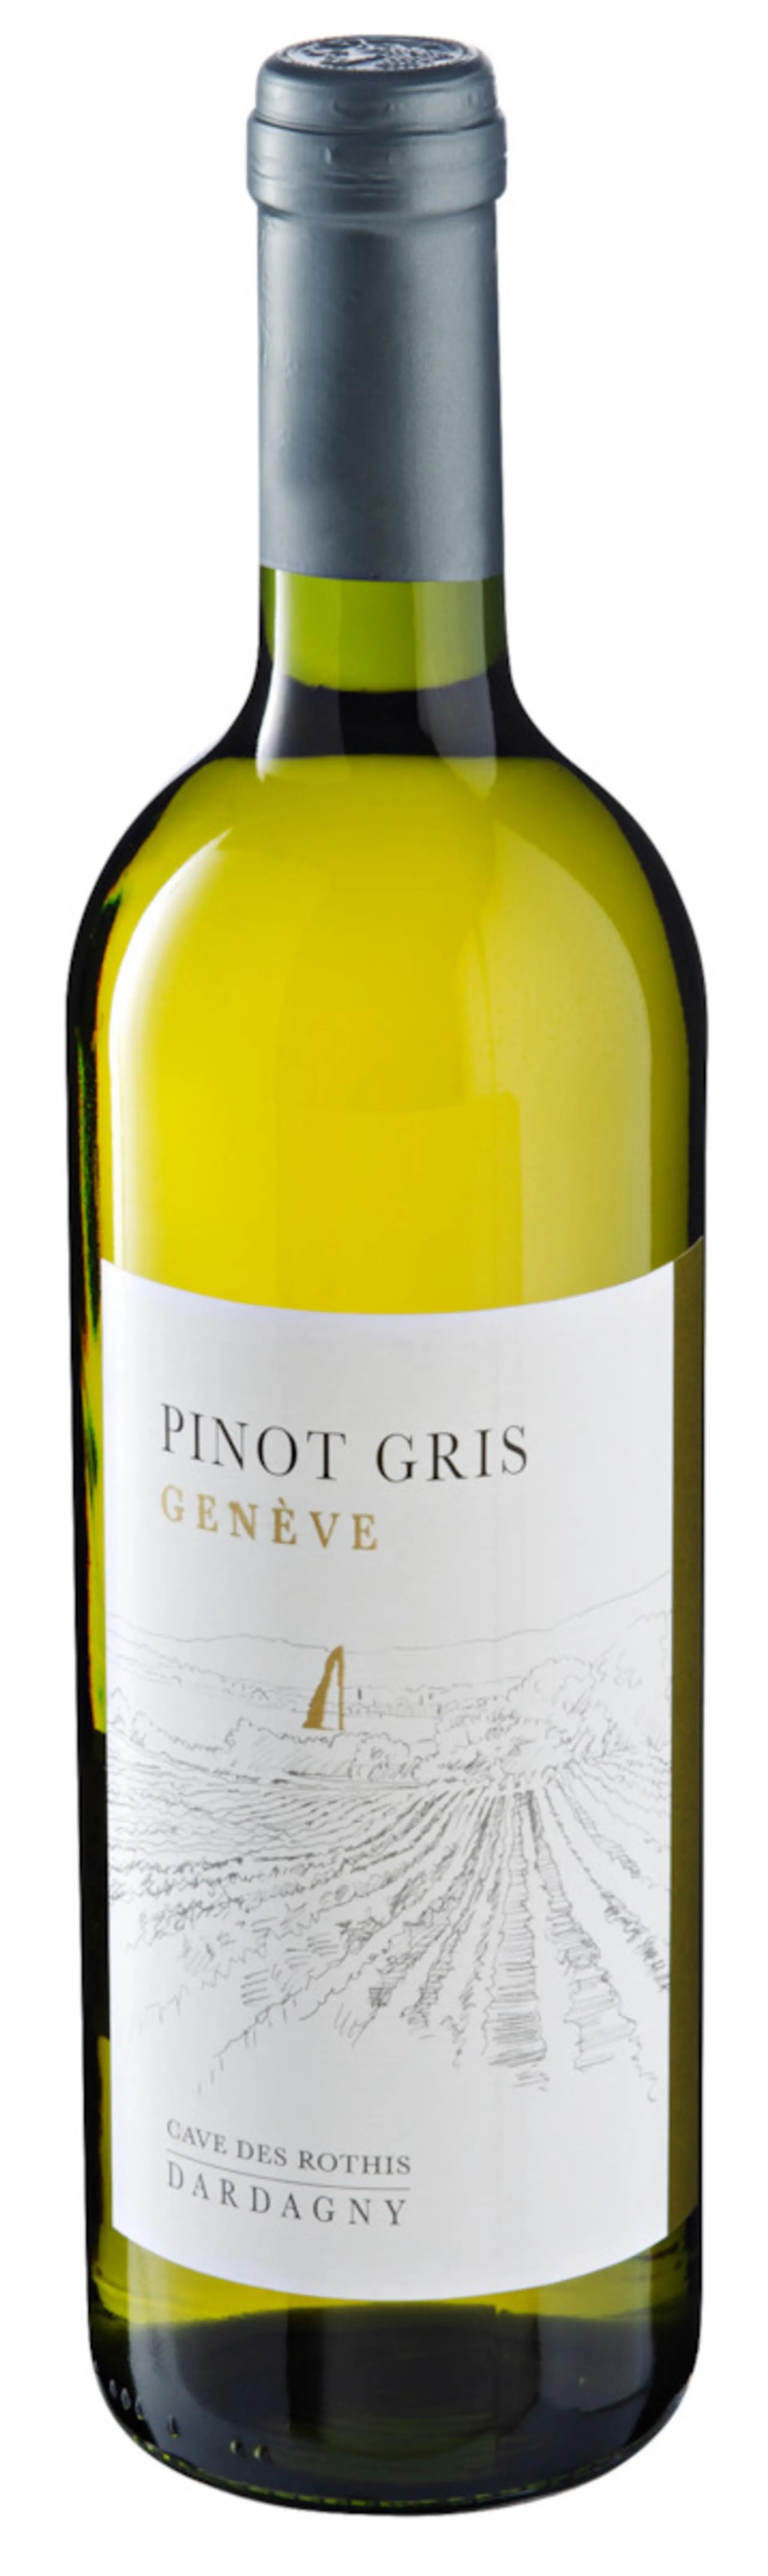 Pinot Gris Cave des Rothis Dardagny